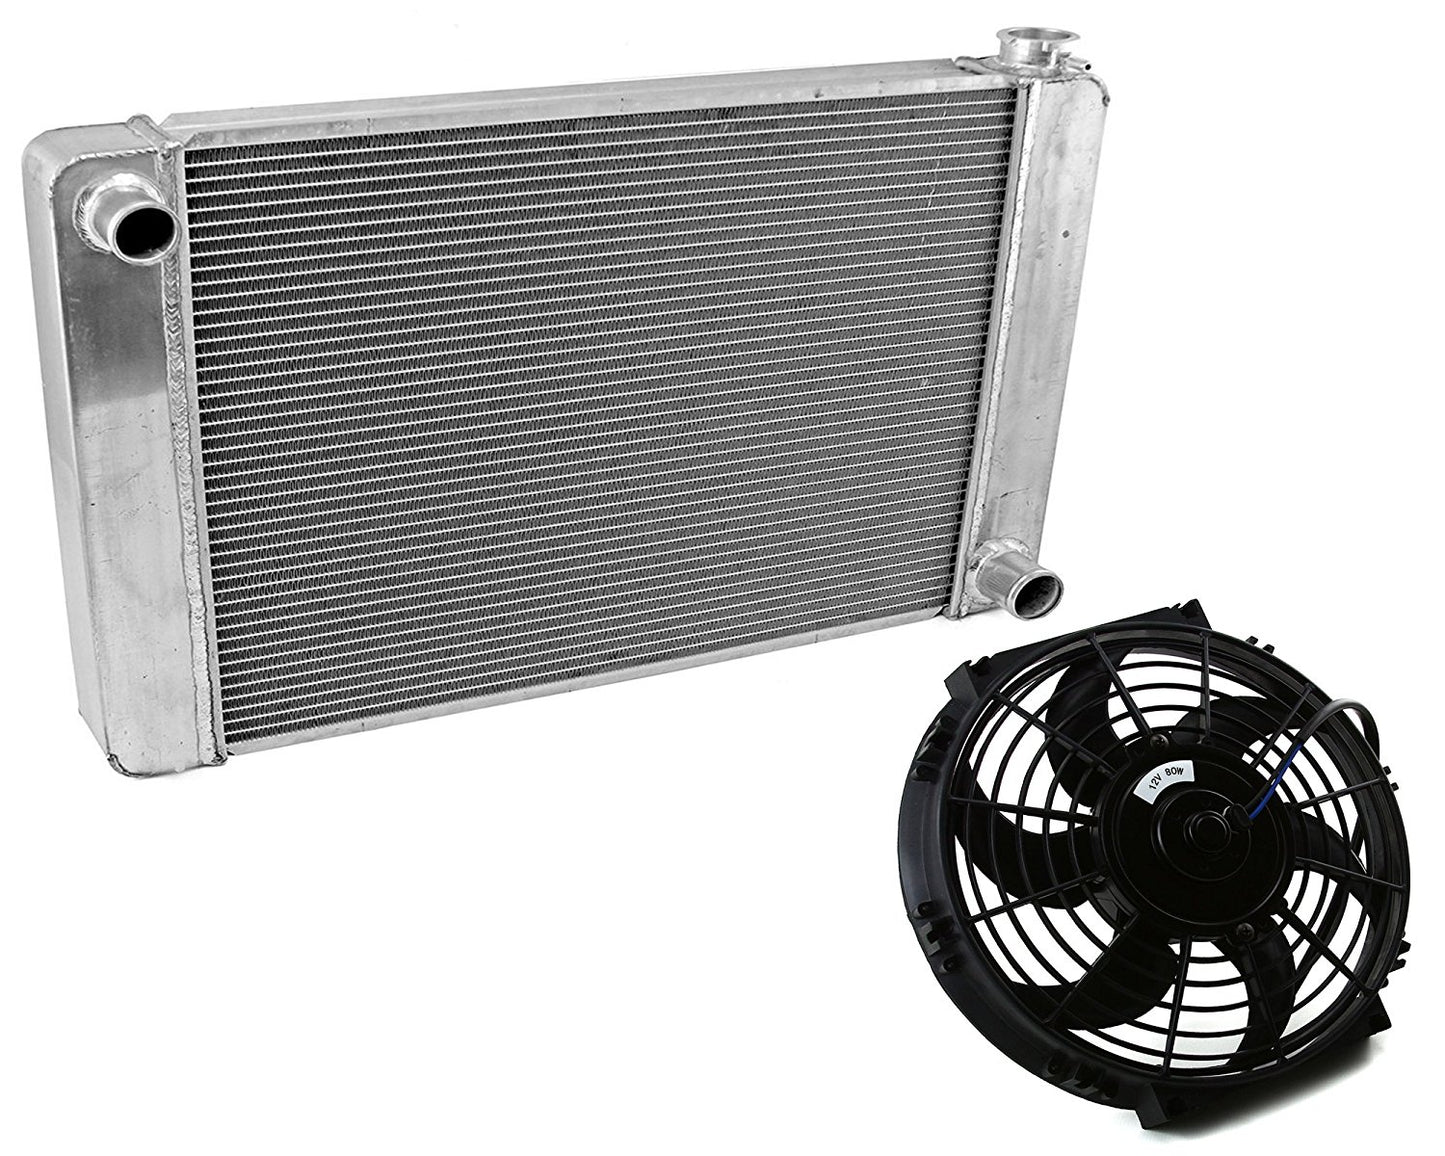 Fabricated Aluminum Radiator 30" x 19" x3" Overall For SBC BBC Chevy GM & 10" Electric Curved Blade Reversible radiator Cooling Fan